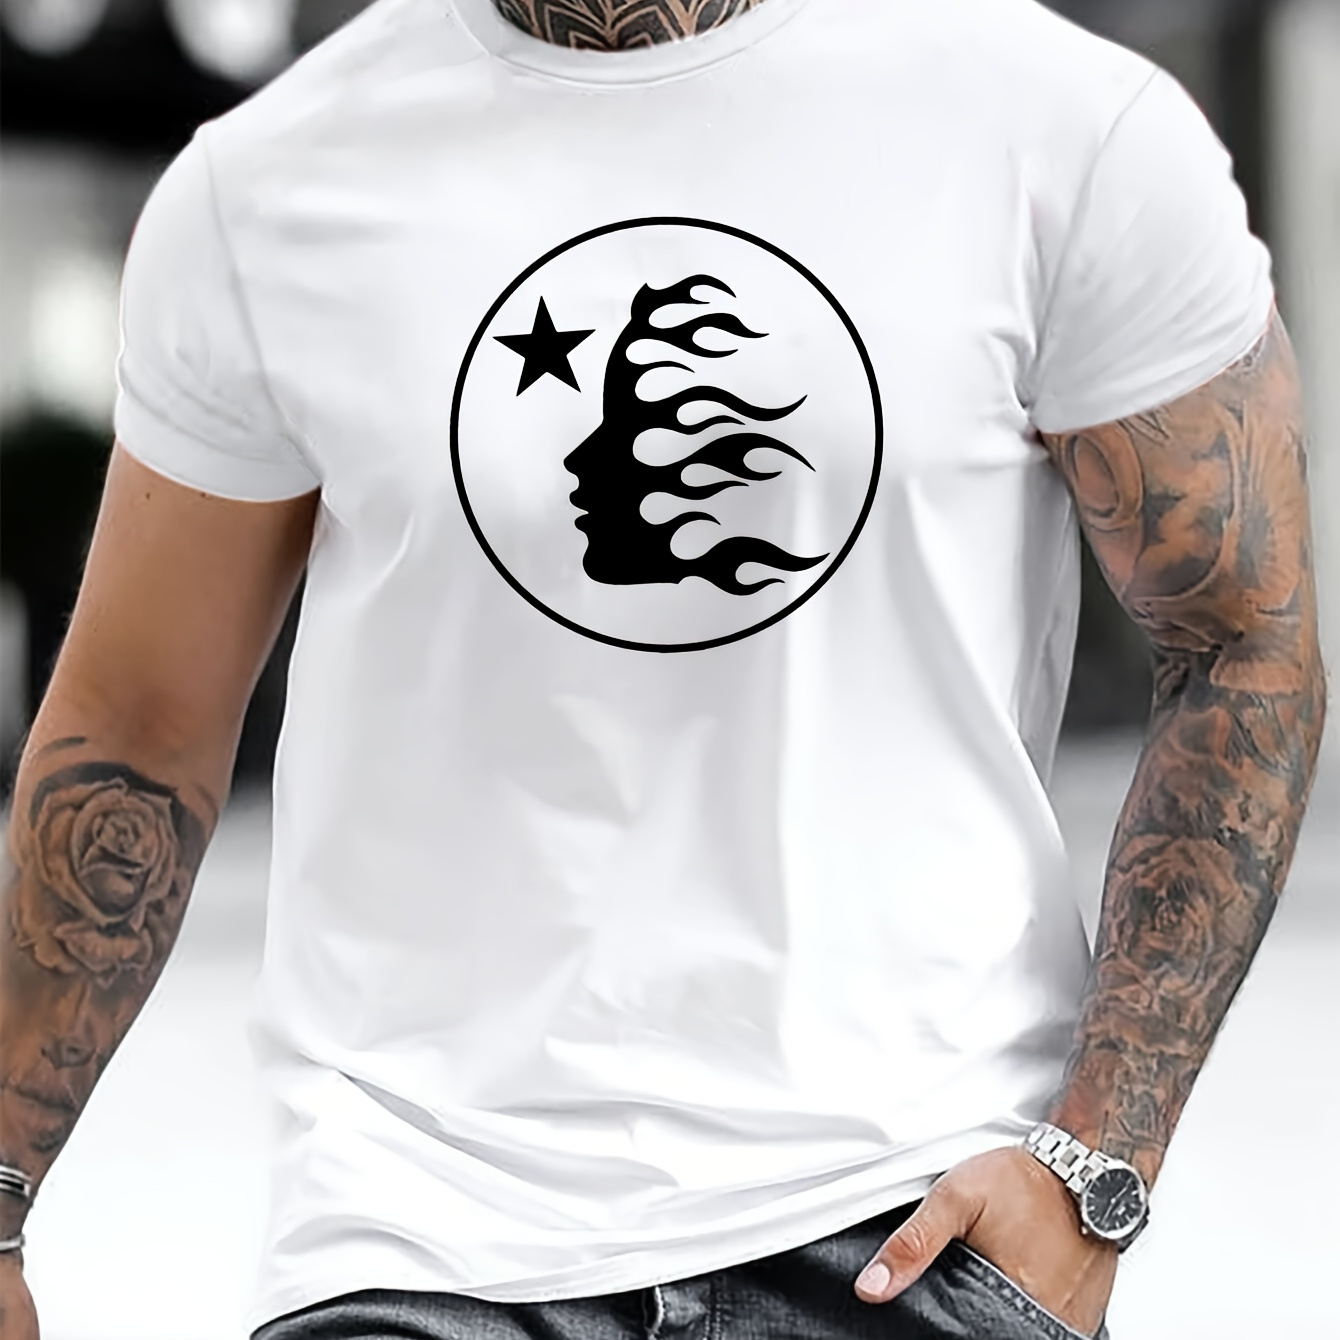 

Men's Creative Graphic Crew Neck T-shirt With Stylish Print, Comfy Tee For Summer, Men's Short Sleeve Top For Daily Activities